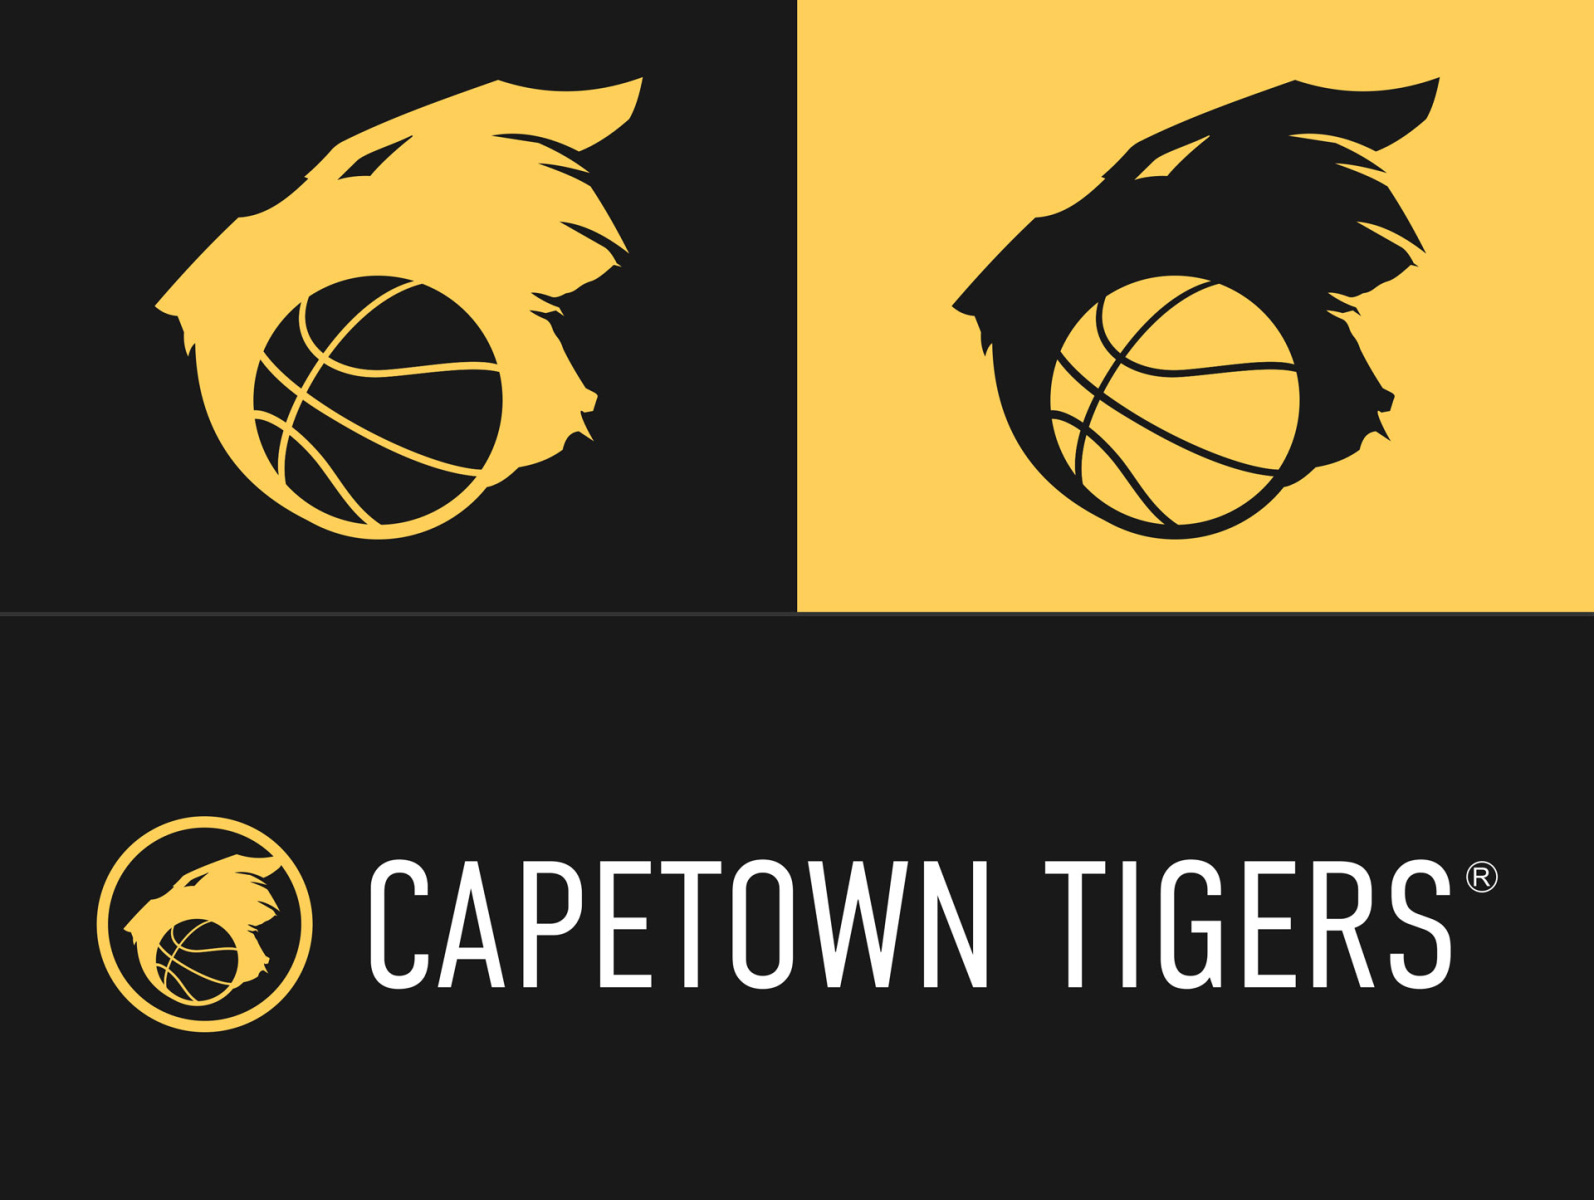 Cape Town Tigers Brand ID by Enensa on Dribbble